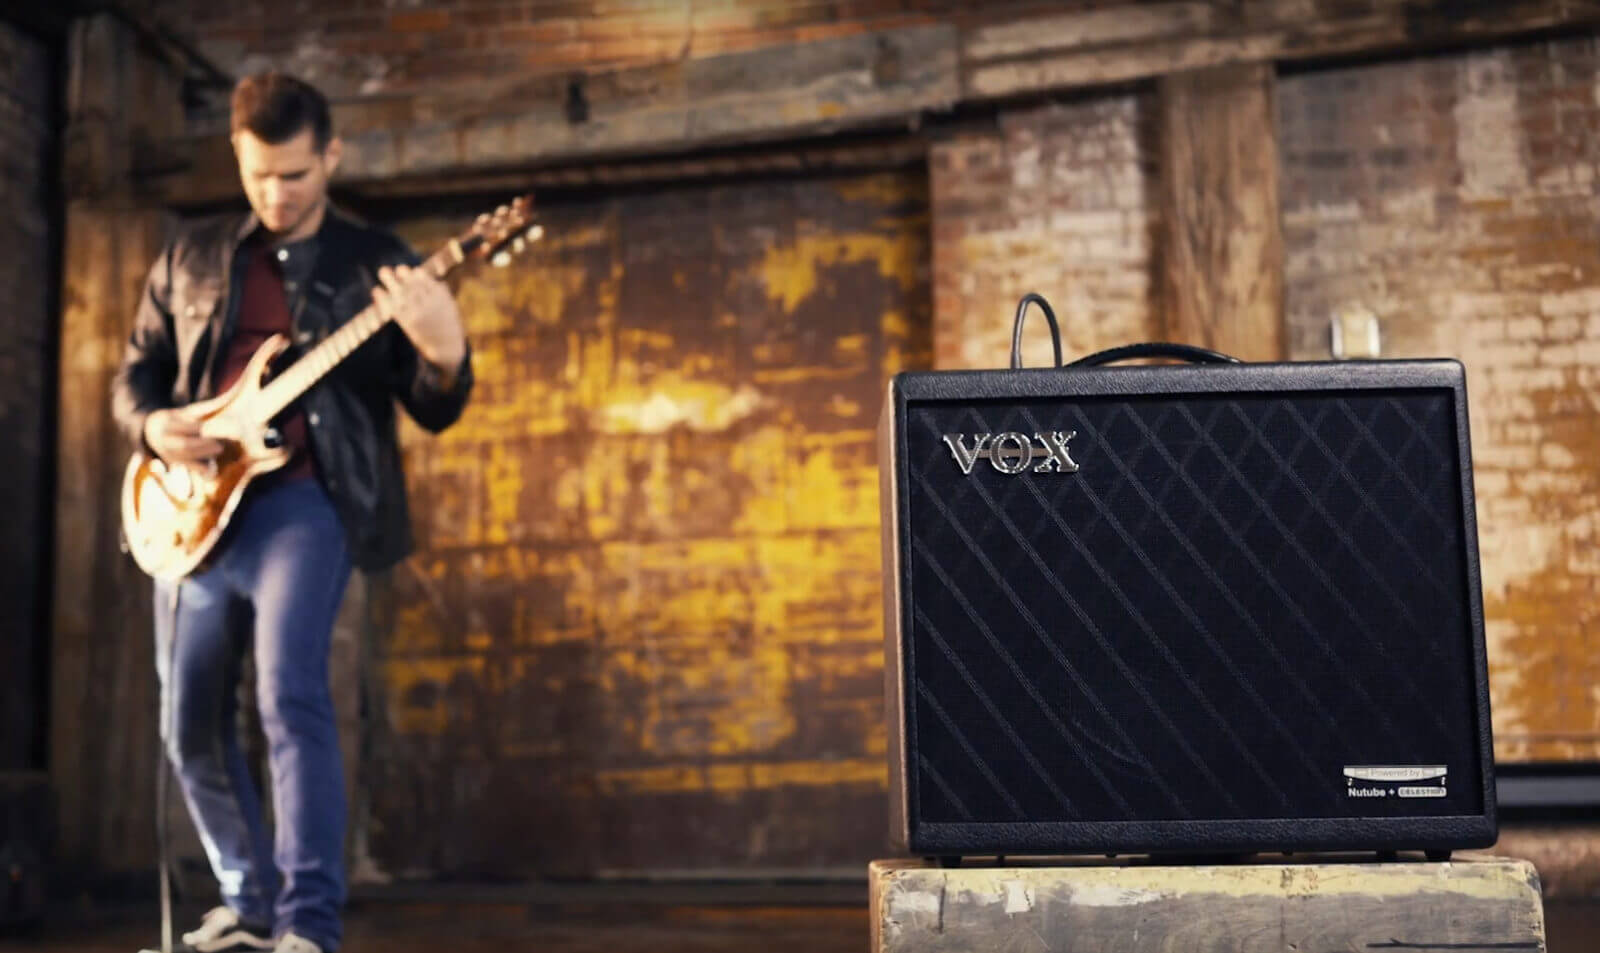 man playing electric guitar behind VOX amplifier